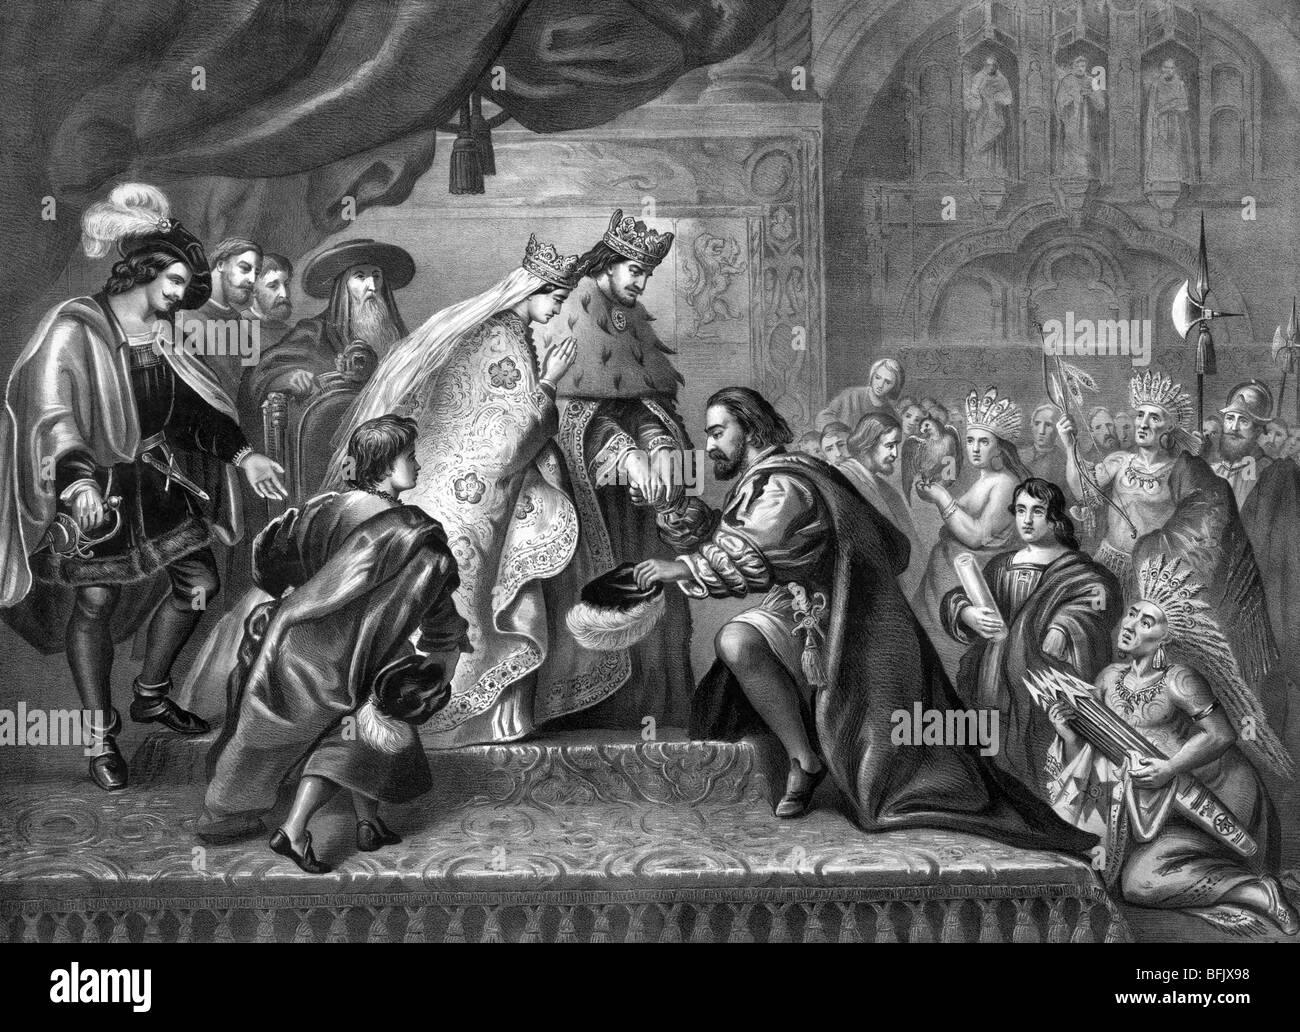 Print c1870 depicting Christopher Columbus kneeling before Ferdinand and Isabella following his first voyage to America in 1492. Stock Photo